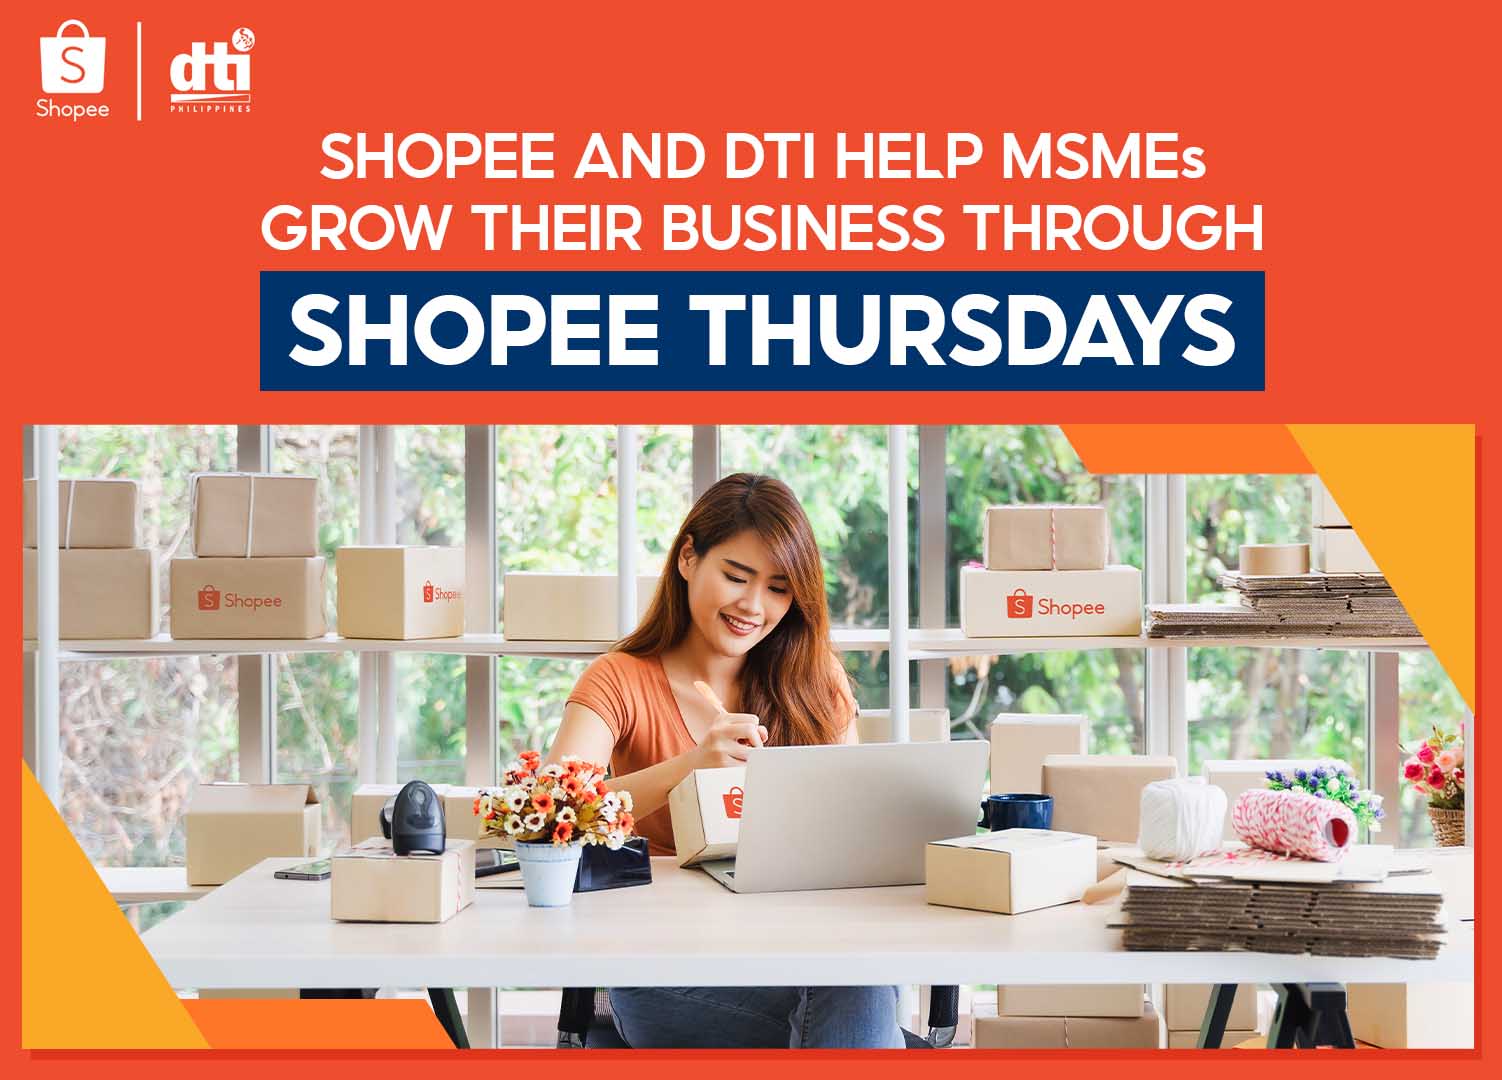 Shopee Launches Shopee Thursdays with the Department of Trade and Industry to Help MSMEs Thrive in the E-commerce Space